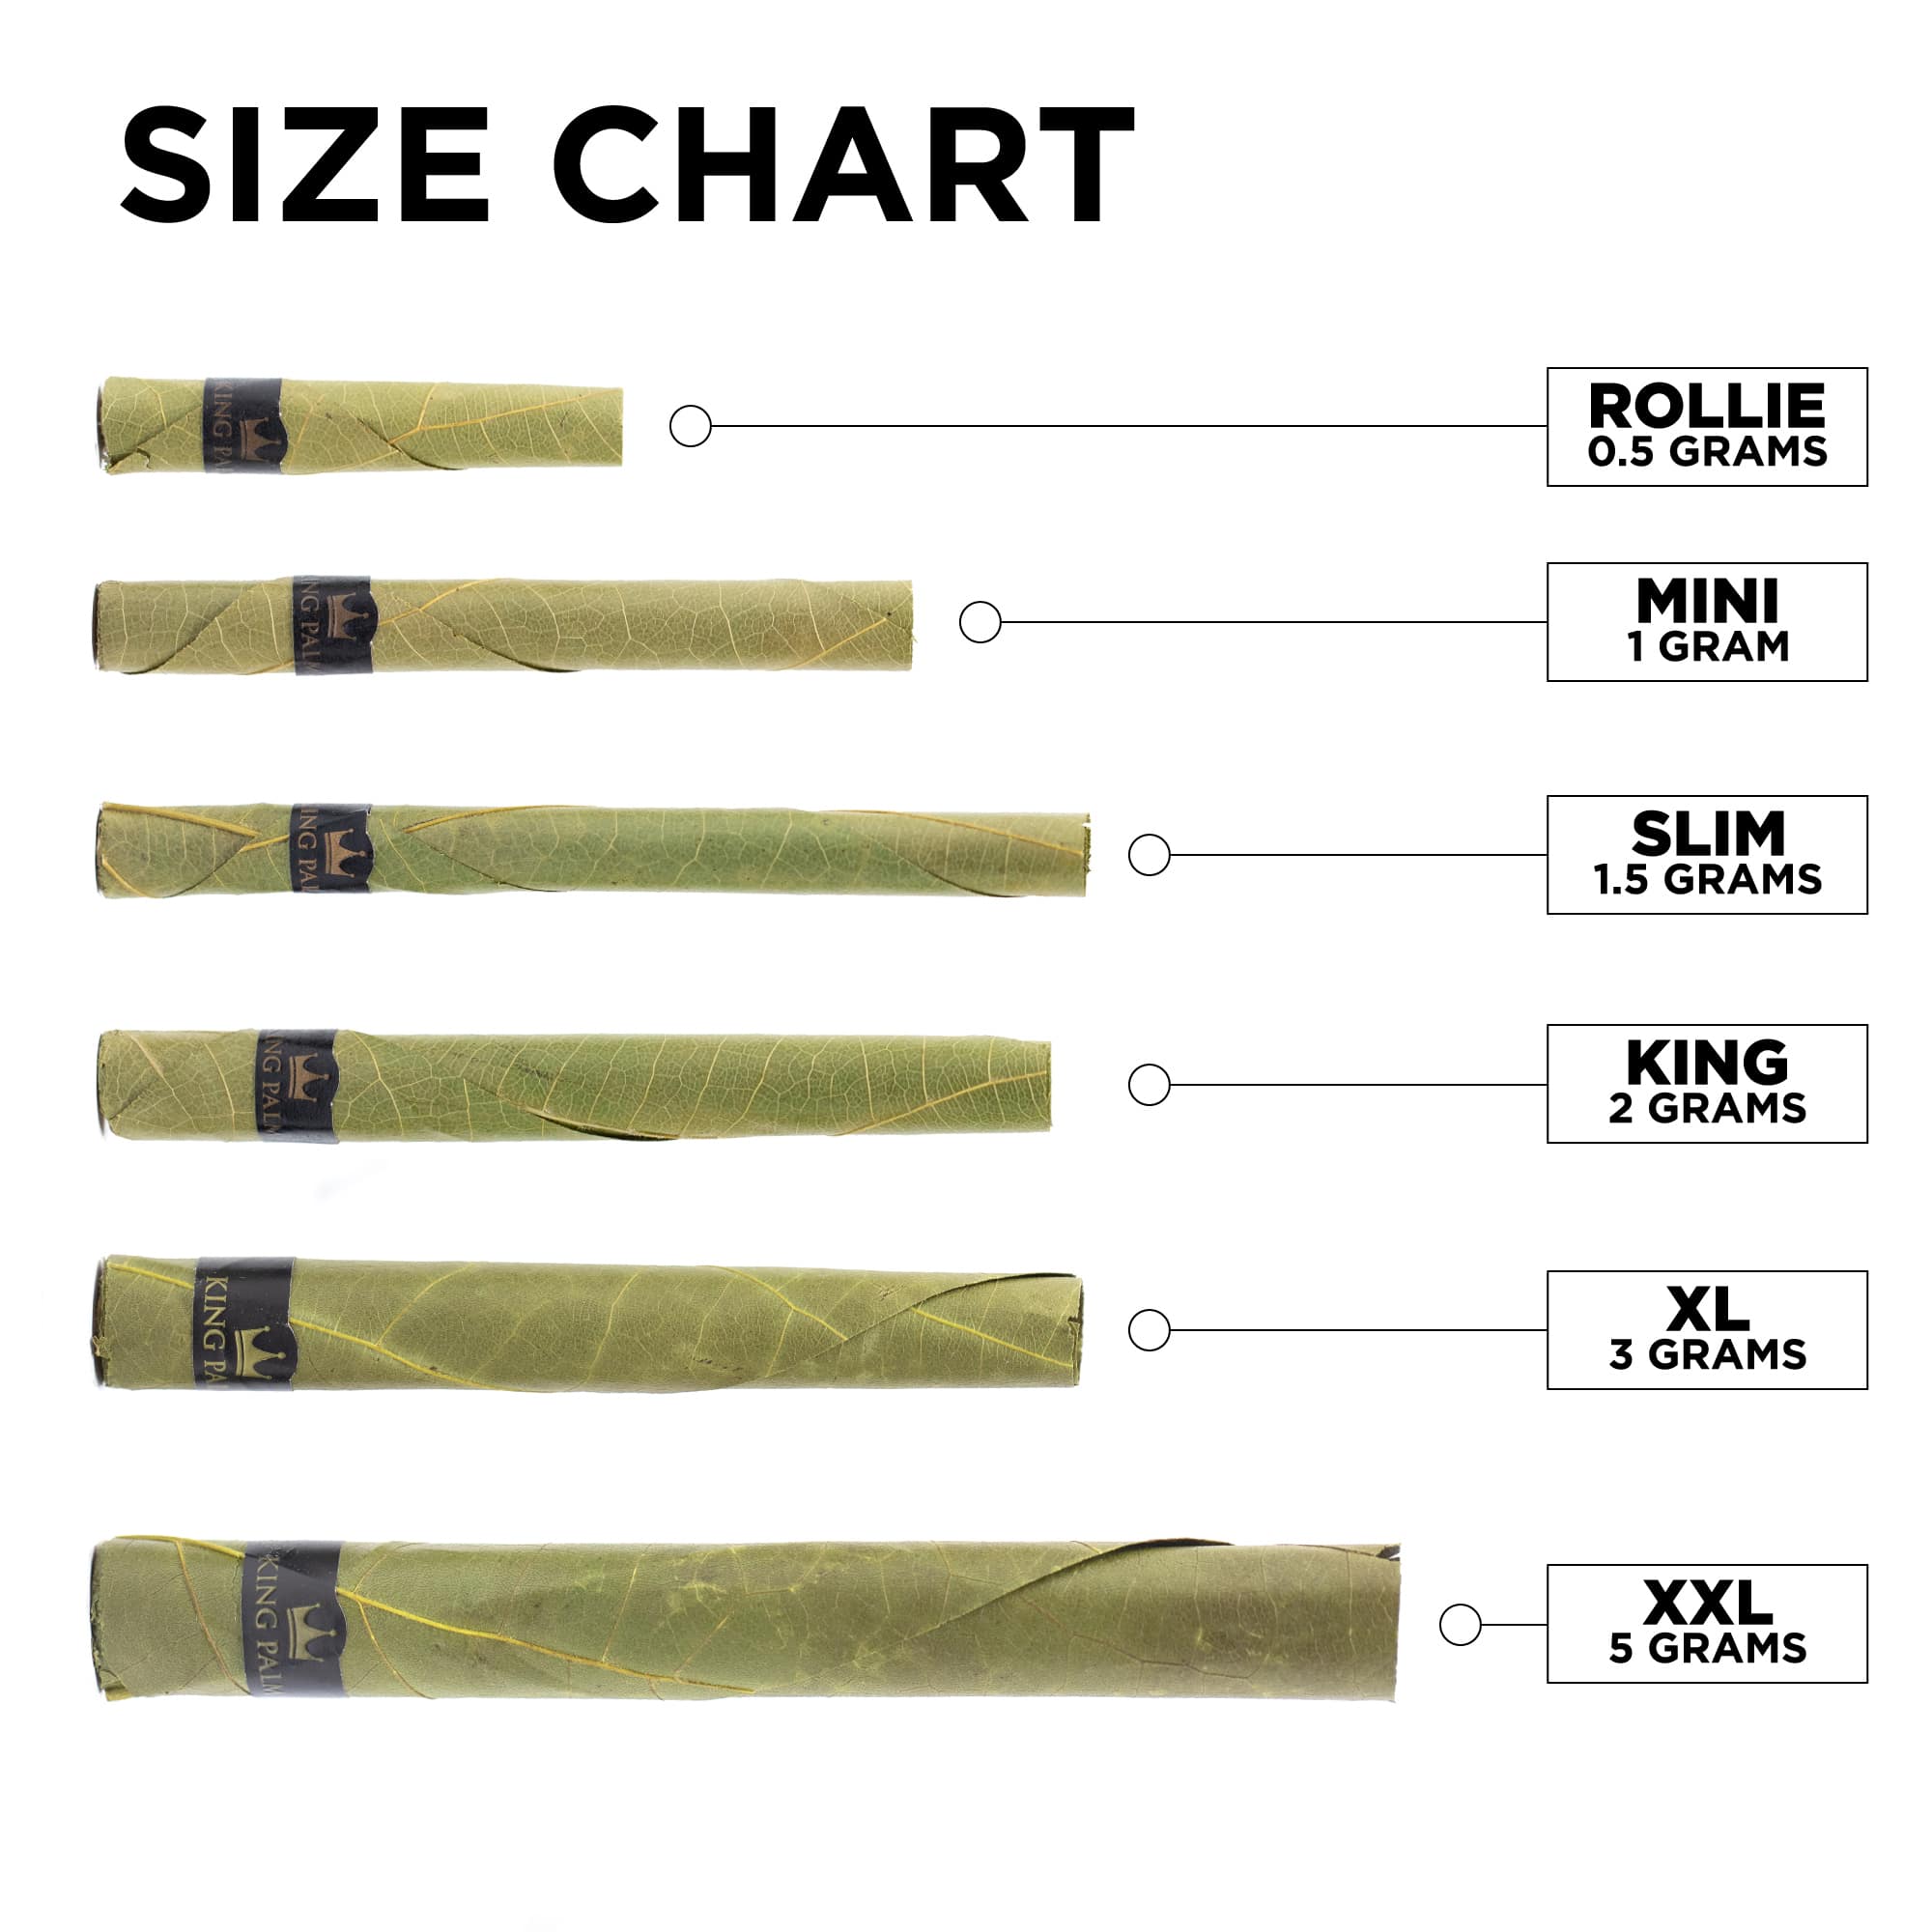 Bulk Pre-Rolled Cones – 1 1/4th Size - 100 ct - Display - KingPalm